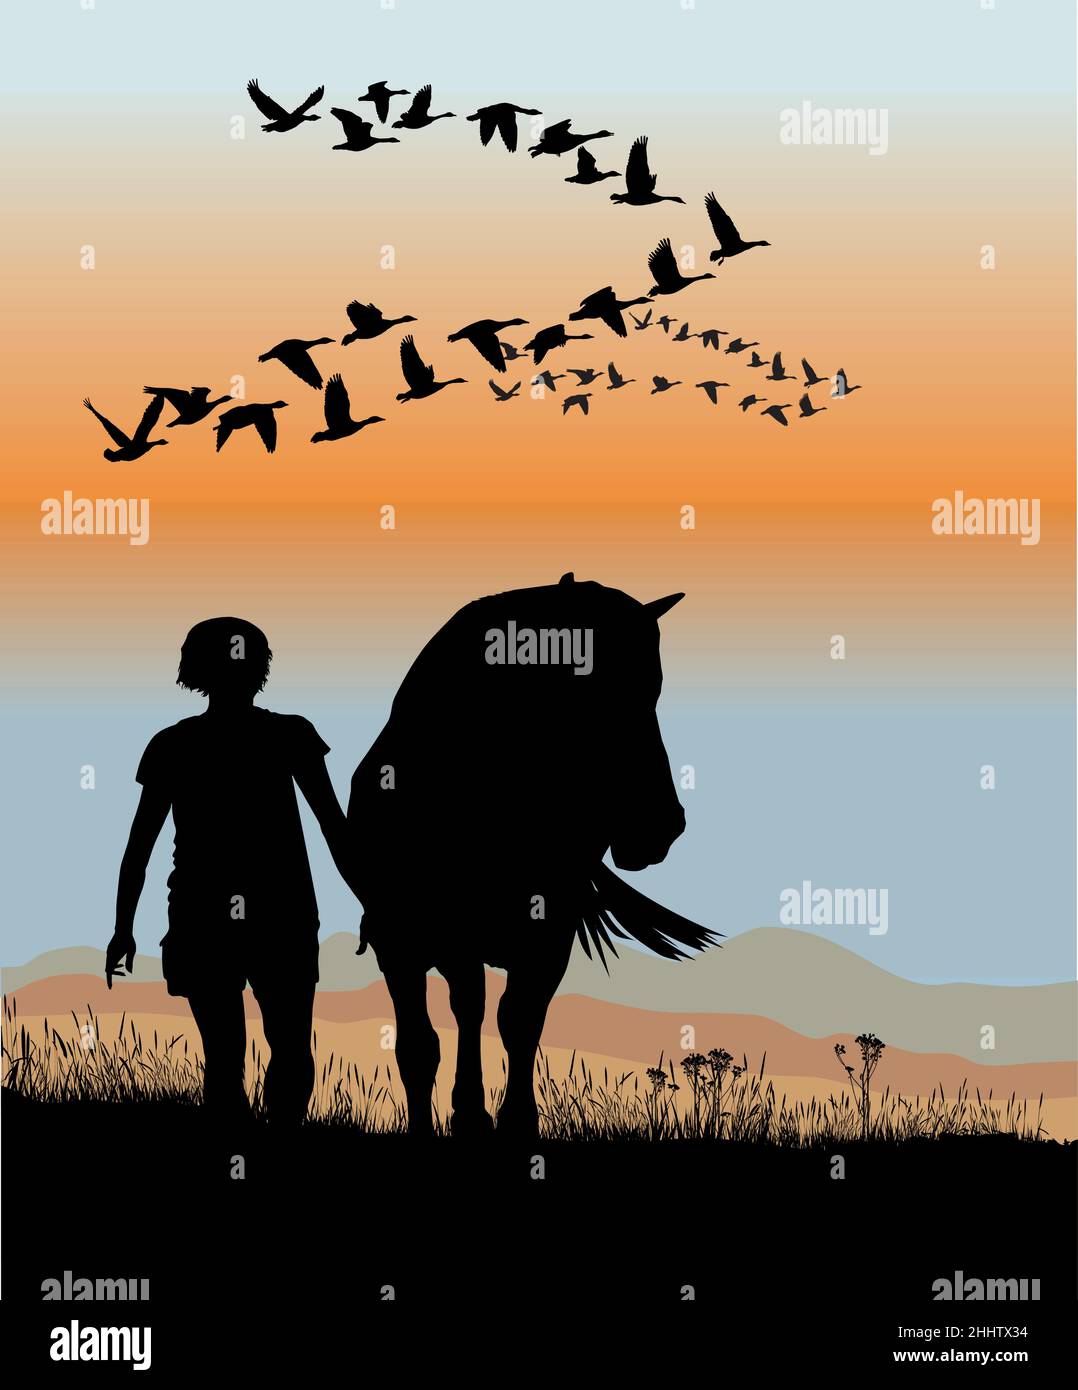 Silhouette of a woman and a horse Stock Vector